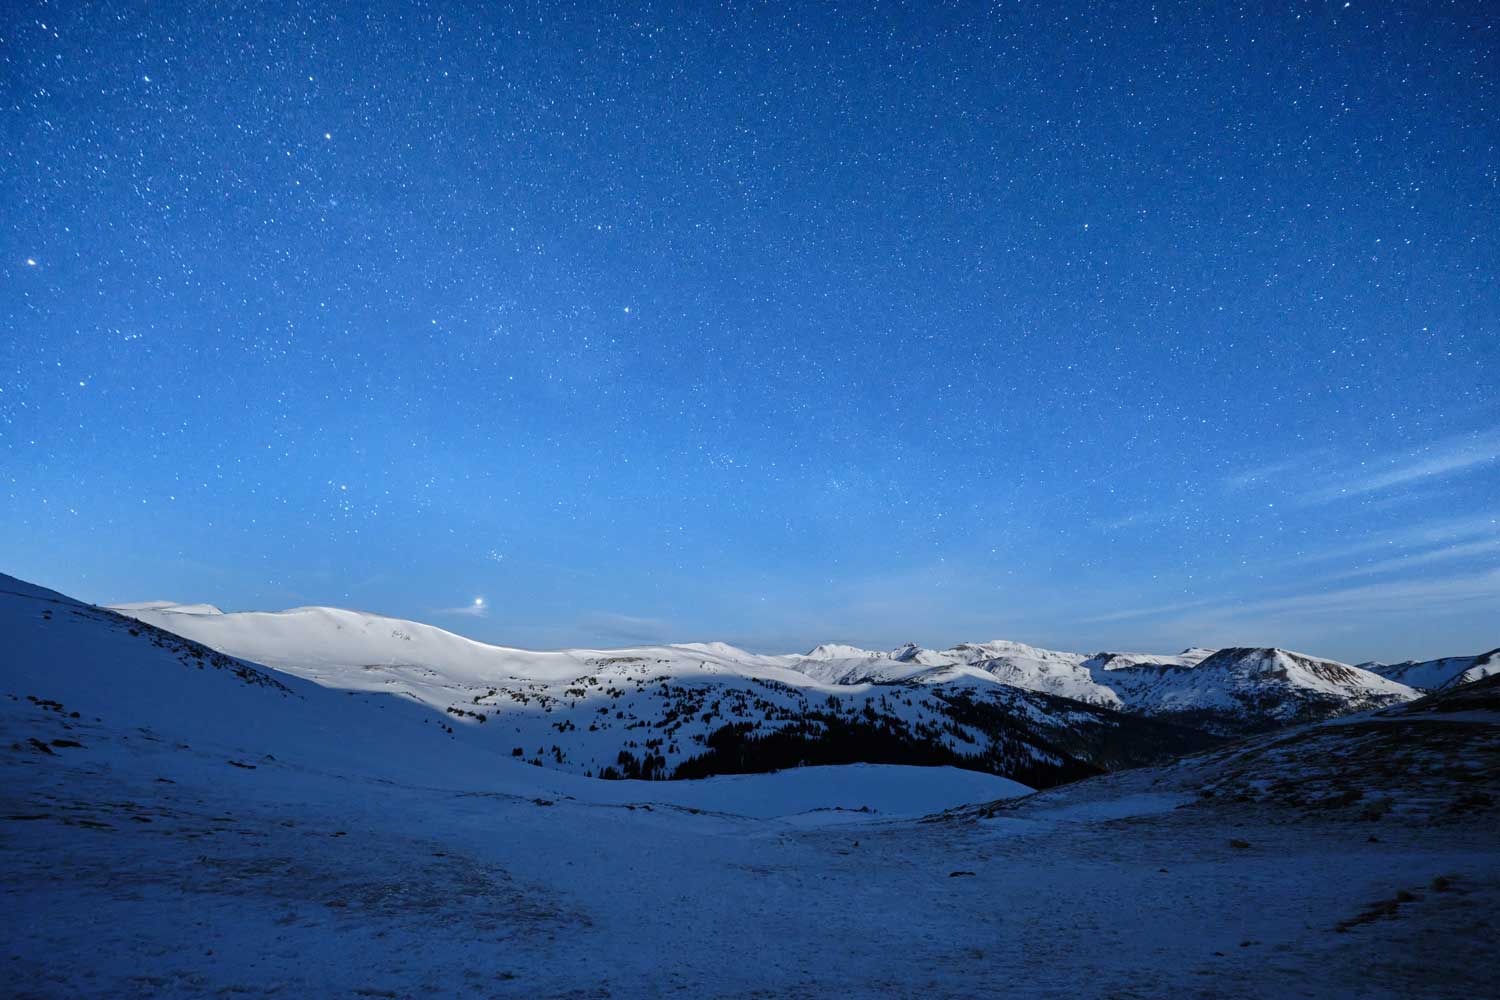 Astro photograph of distant snowy mountains at night below starry sky.